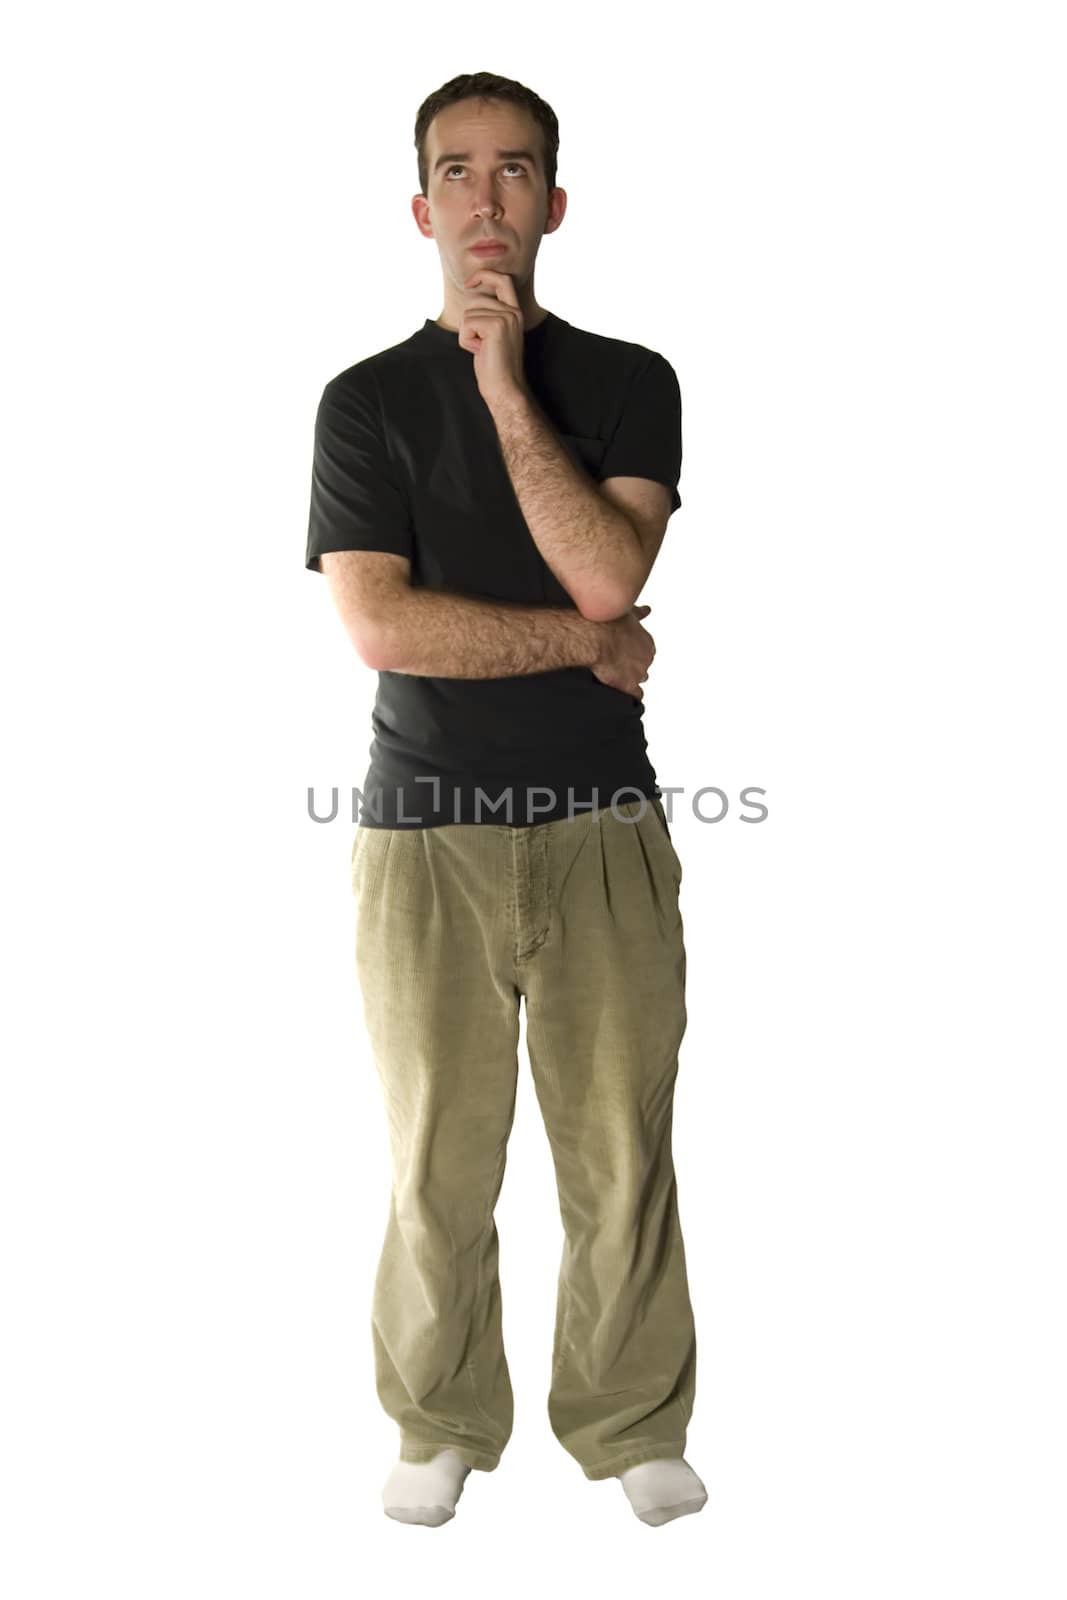 Isolated young man with a full body shot looking up